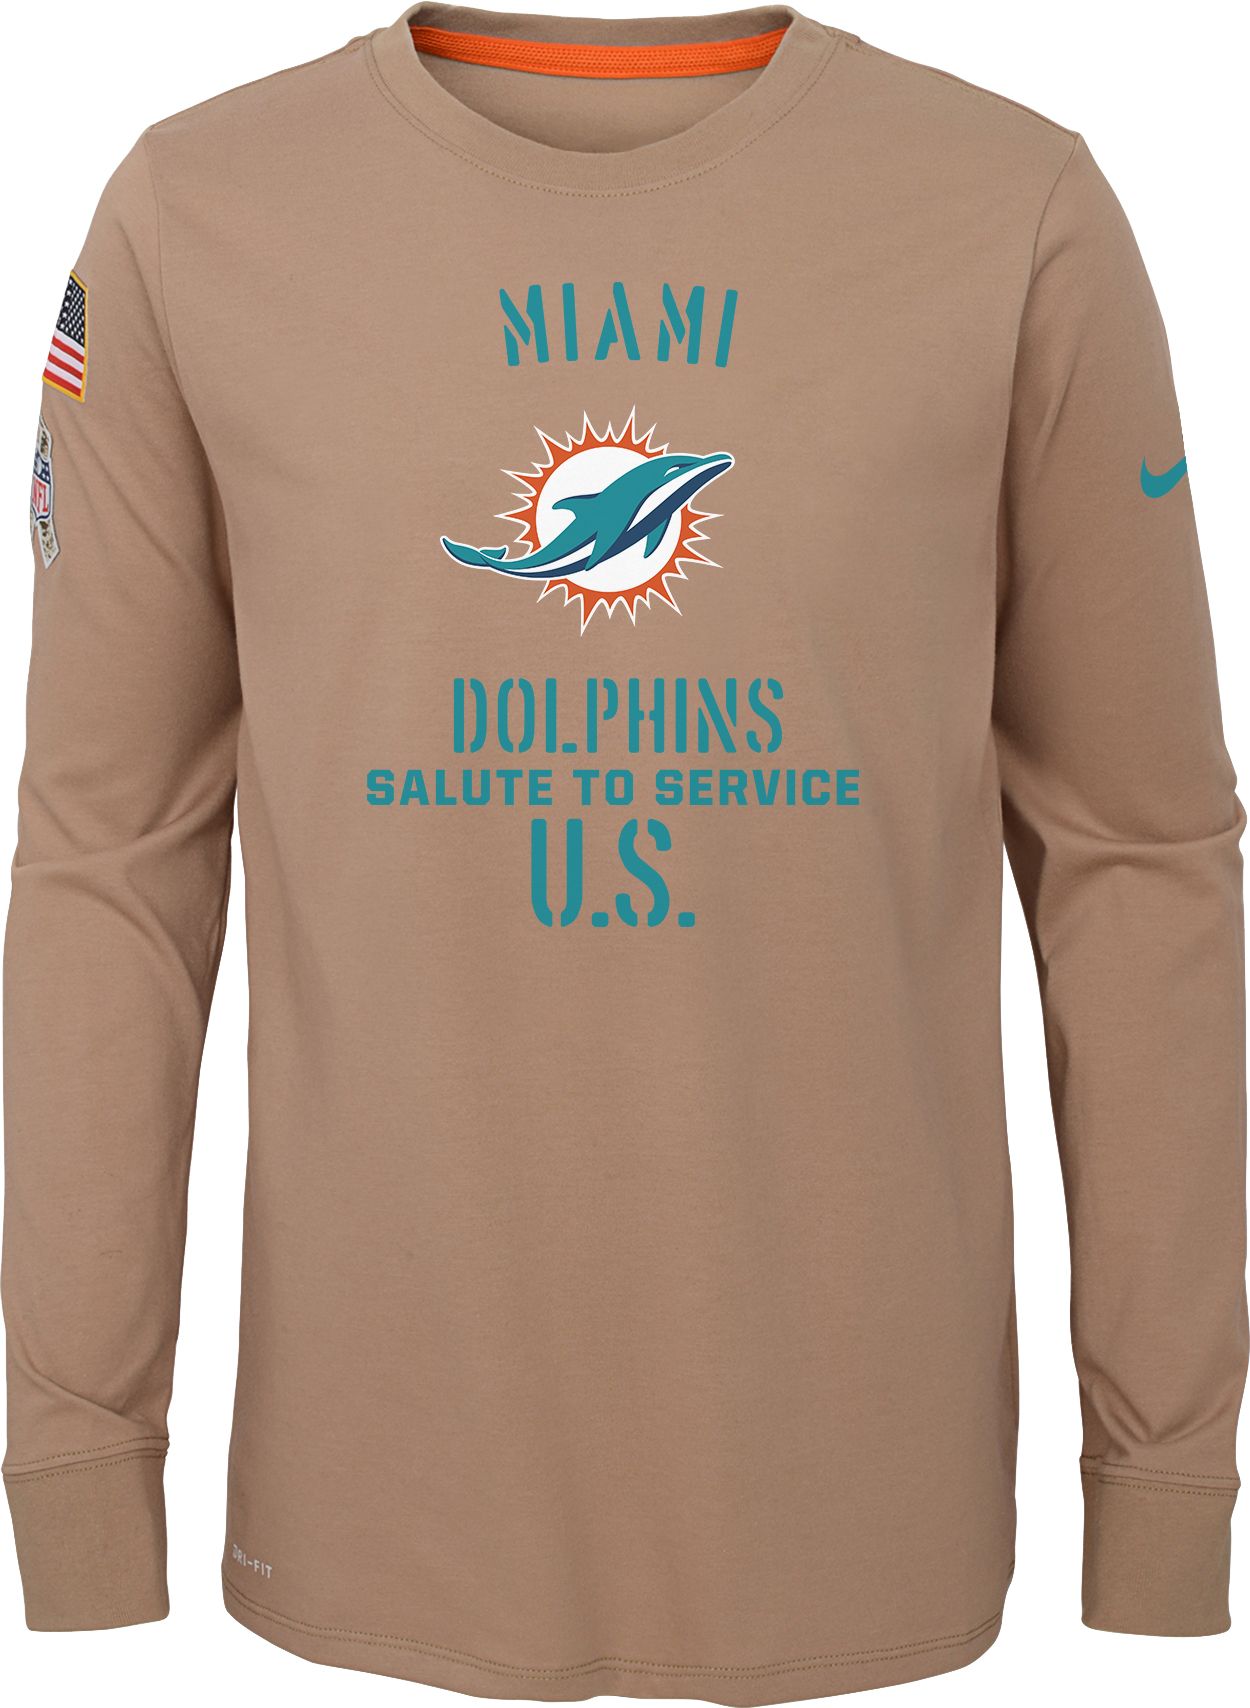 miami dolphins salute to service shirt